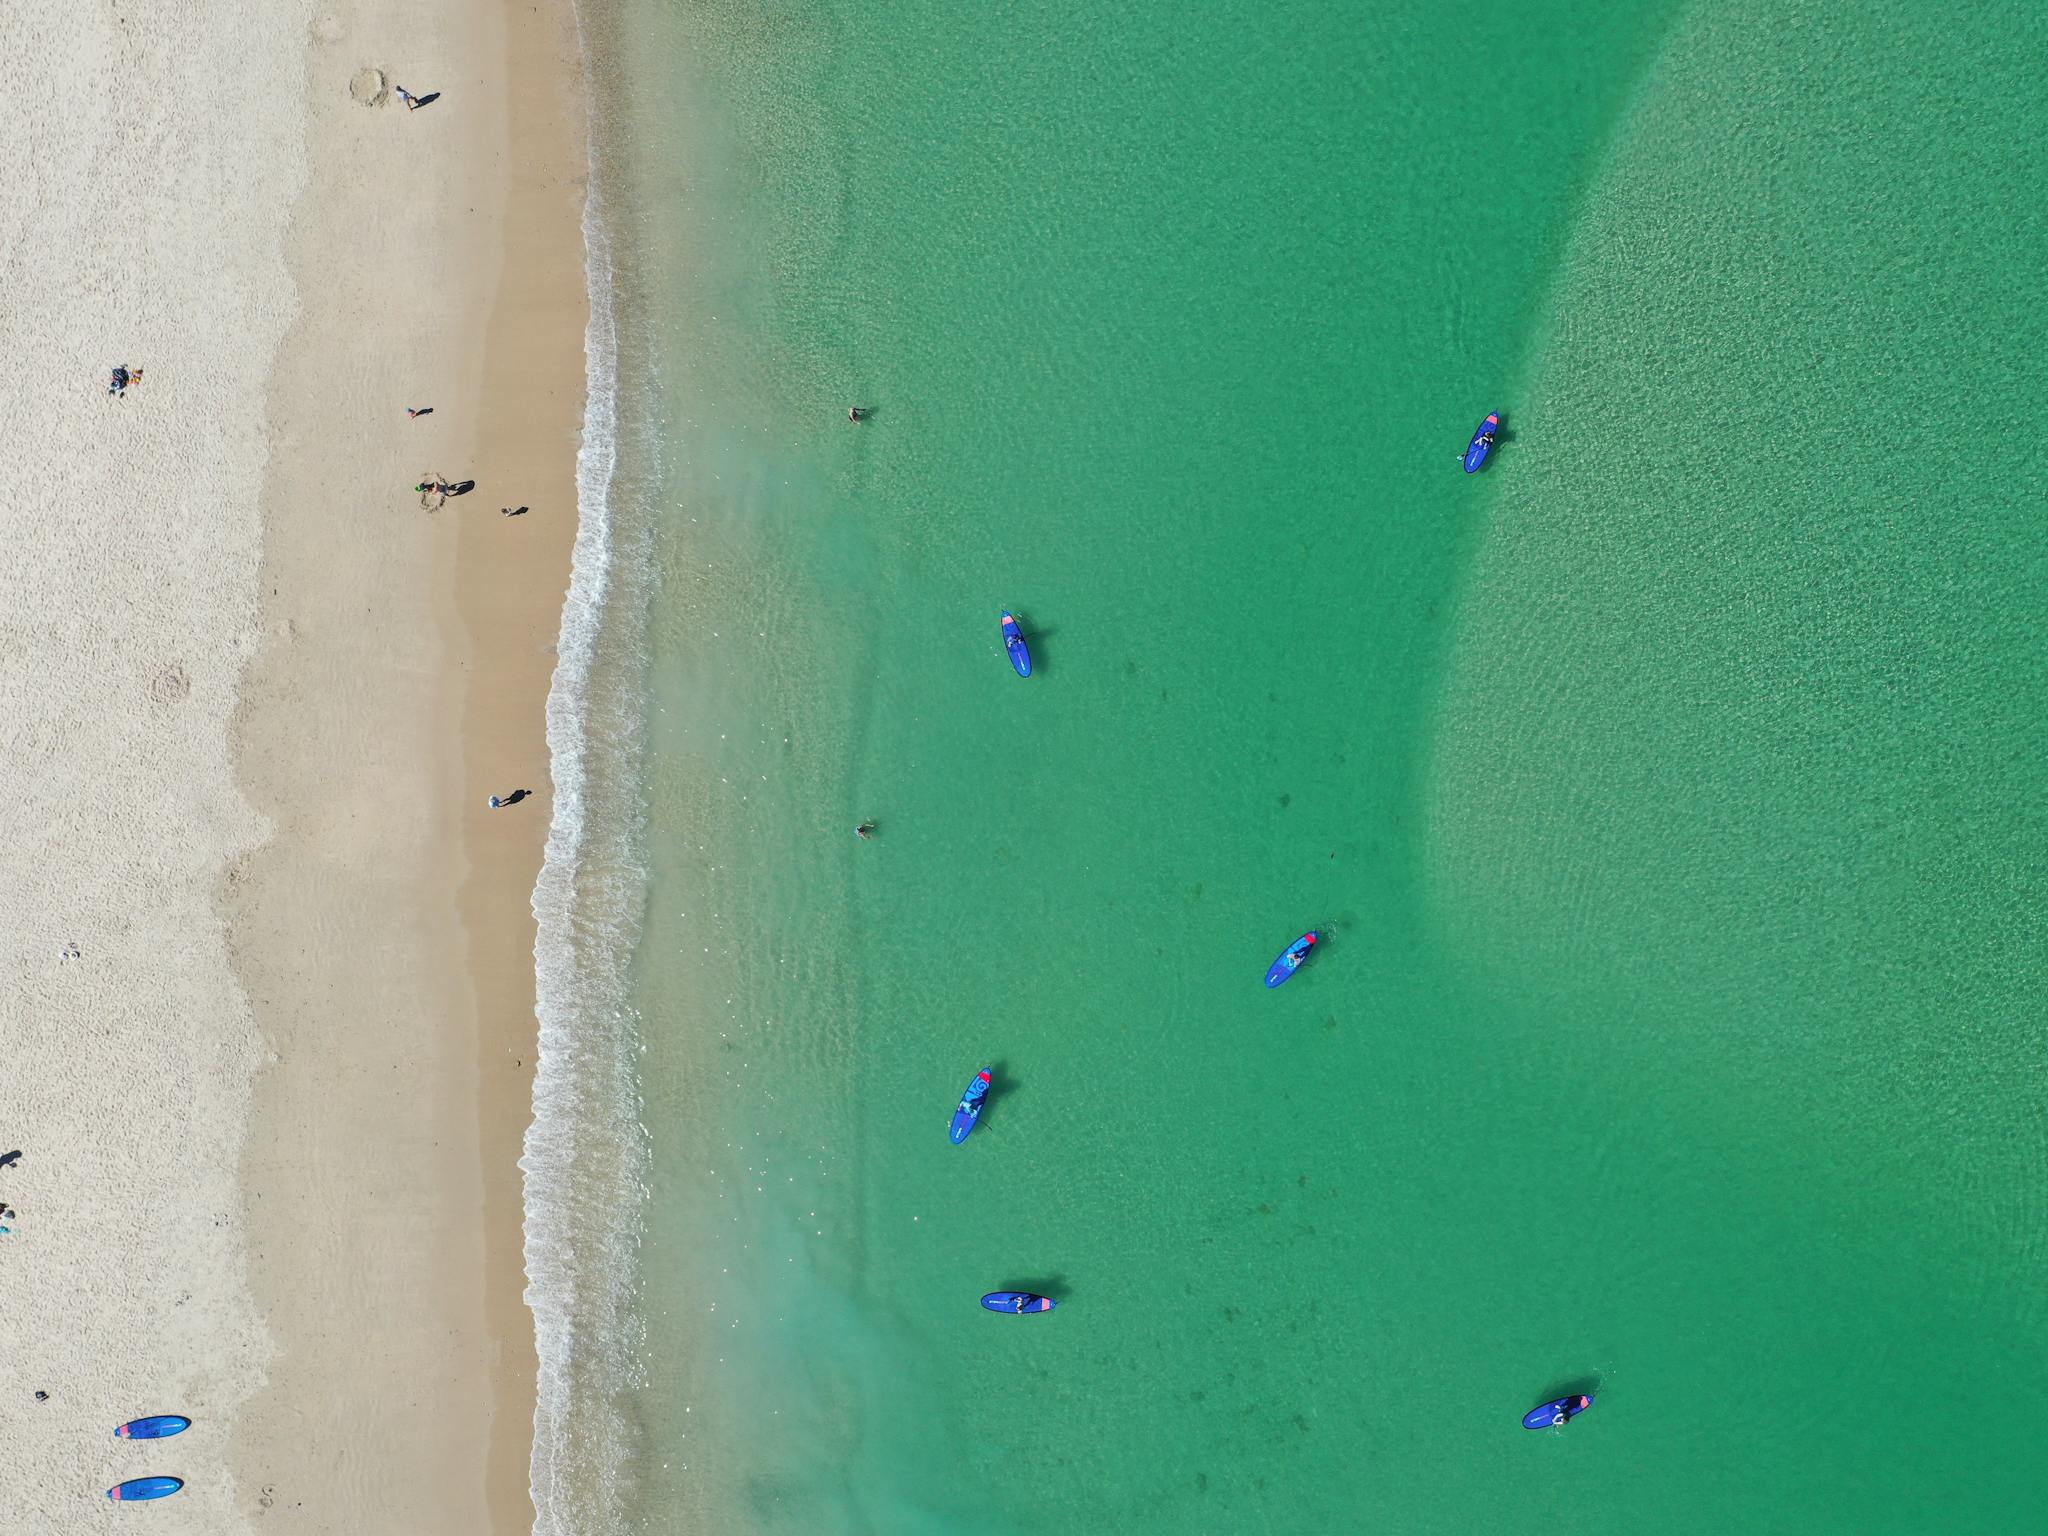 Paddle boarders from above